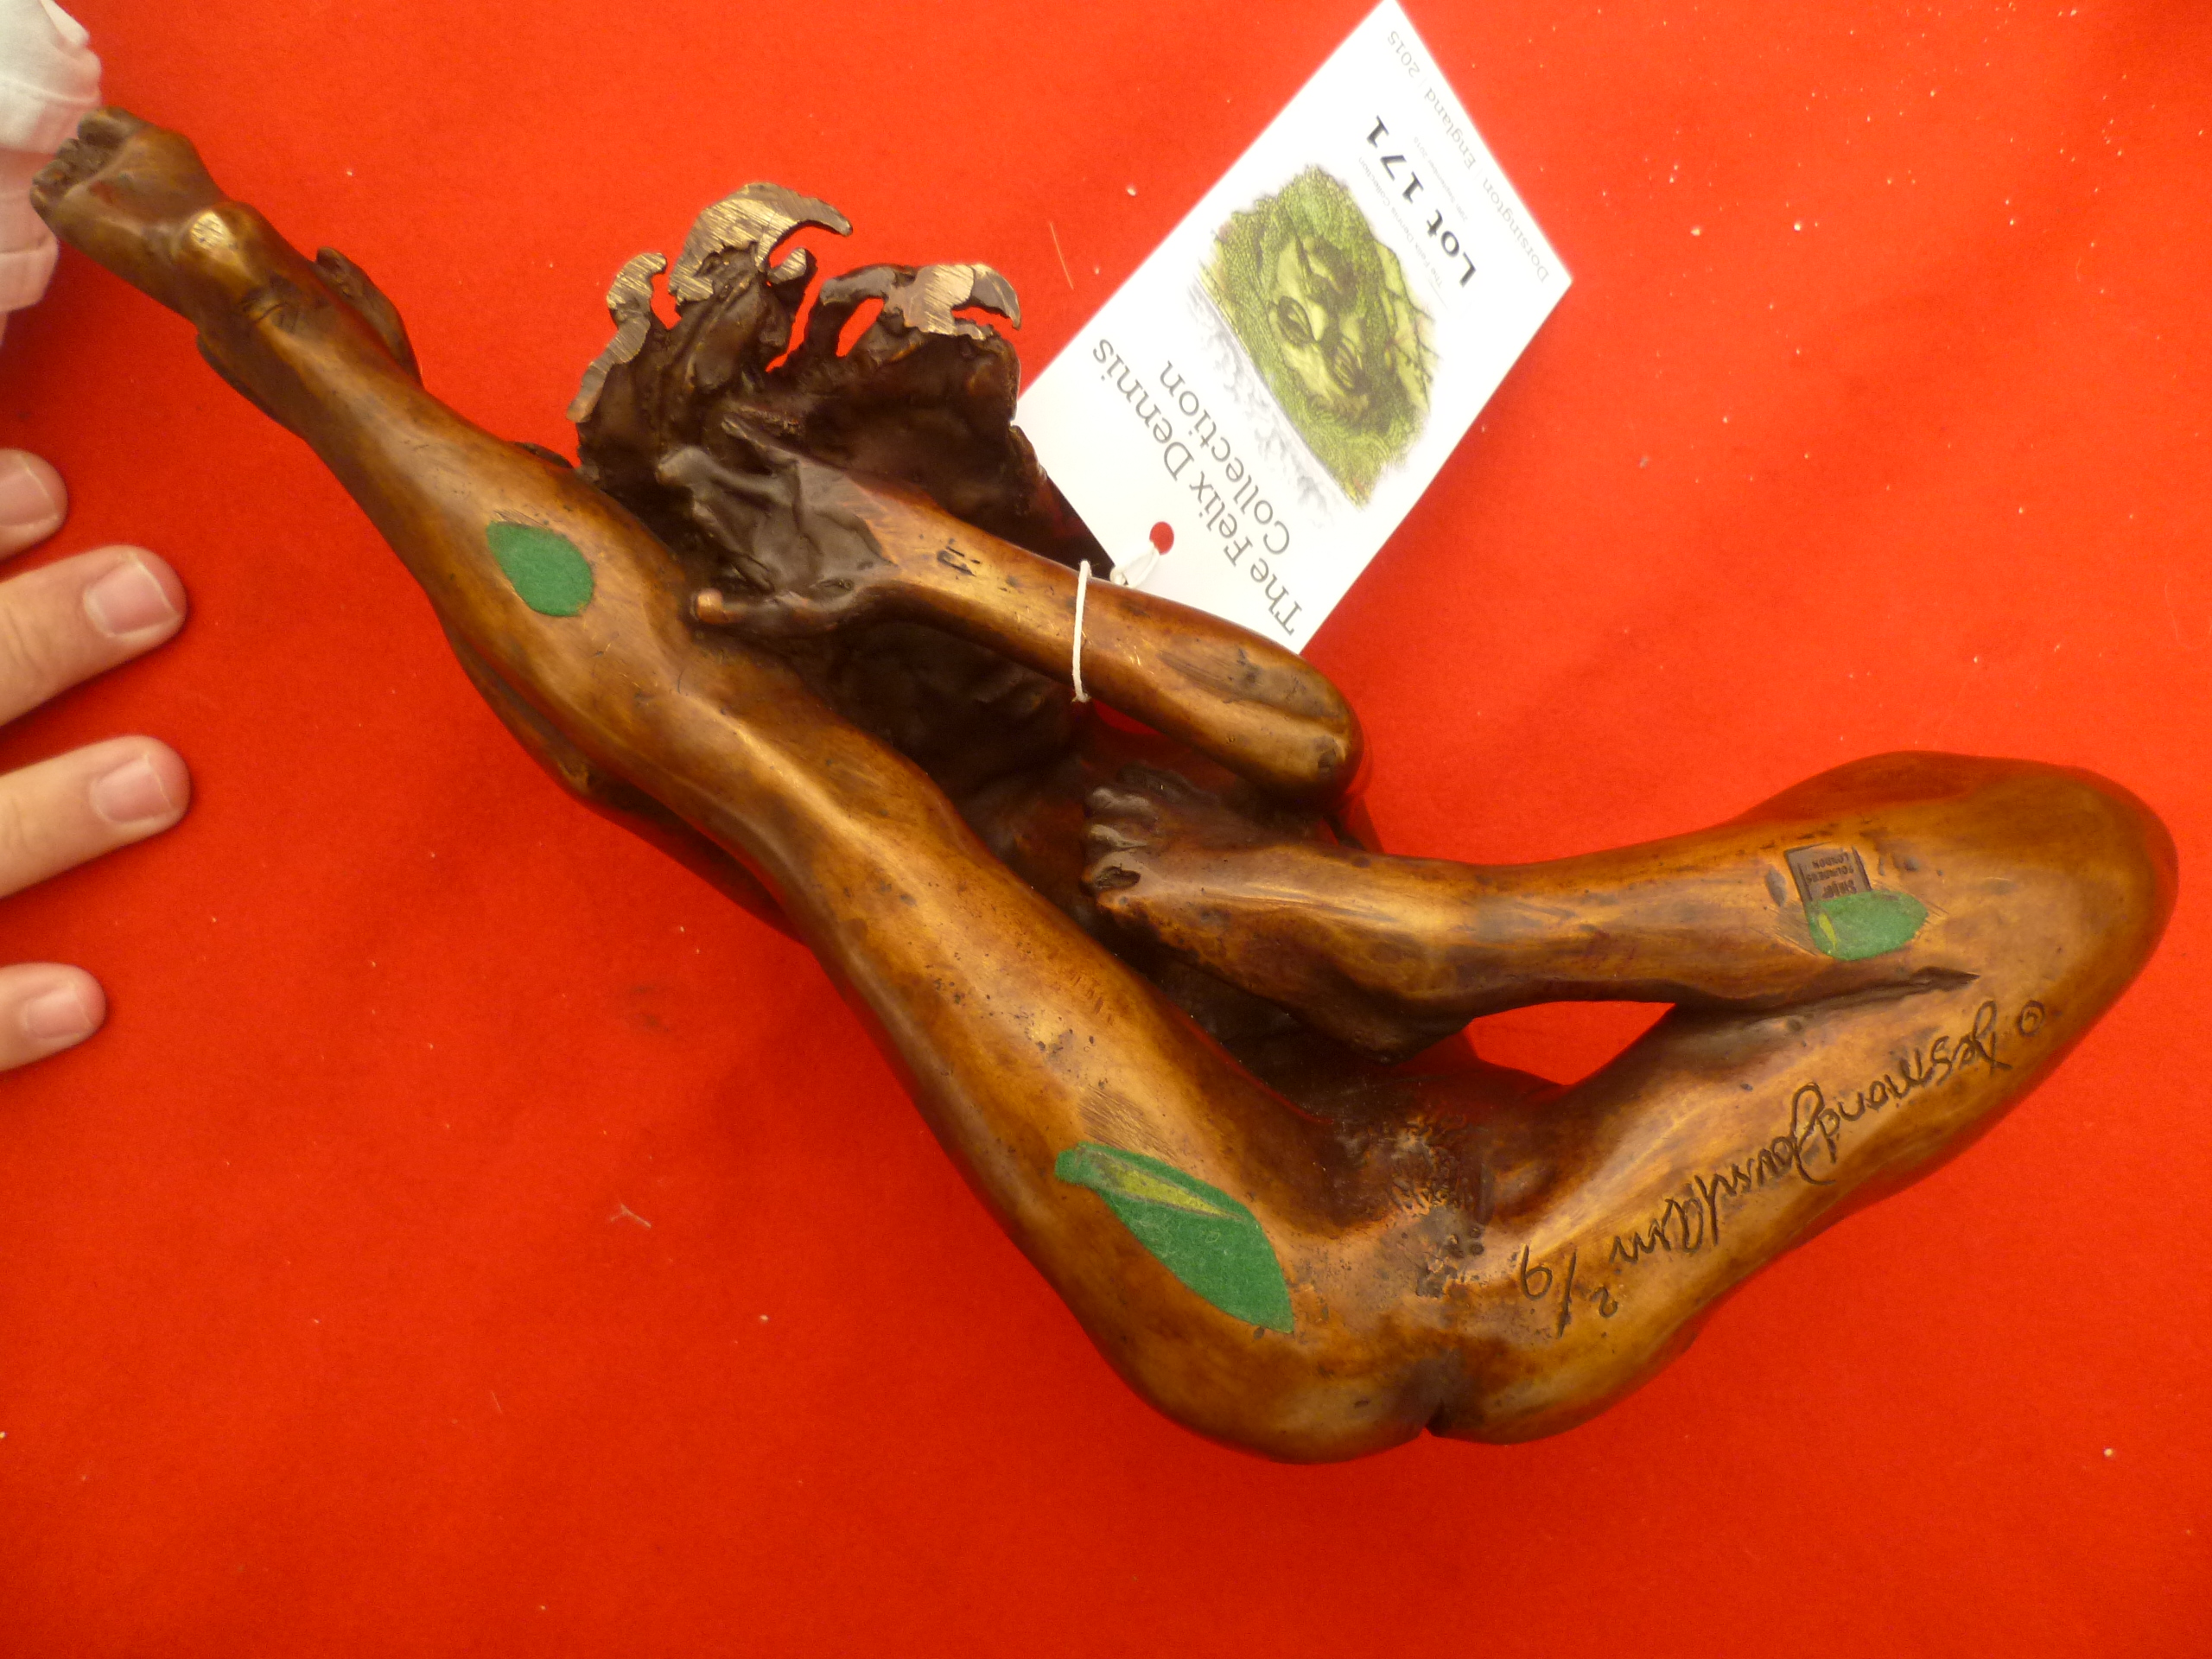 Desmond Fountain (b.1946) "Stretch", a bronze figure of a nude, rich brown patination, edition 2/ - Image 2 of 3